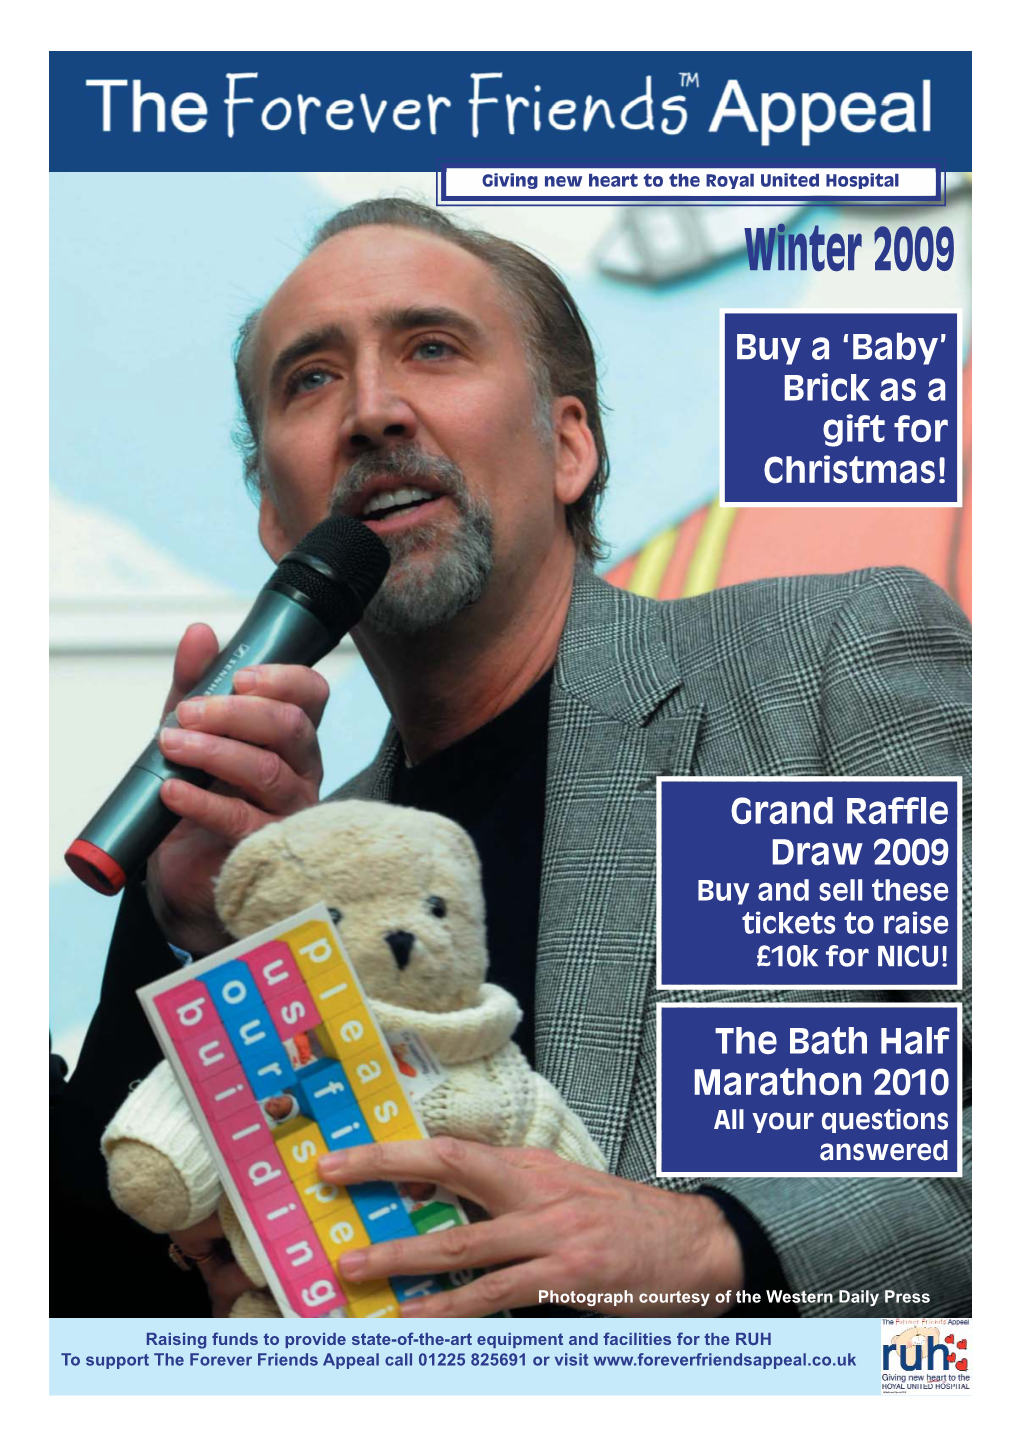 Buy a 'Baby' Brick As a Gift for Christmas! Grand Raffle Draw 2009